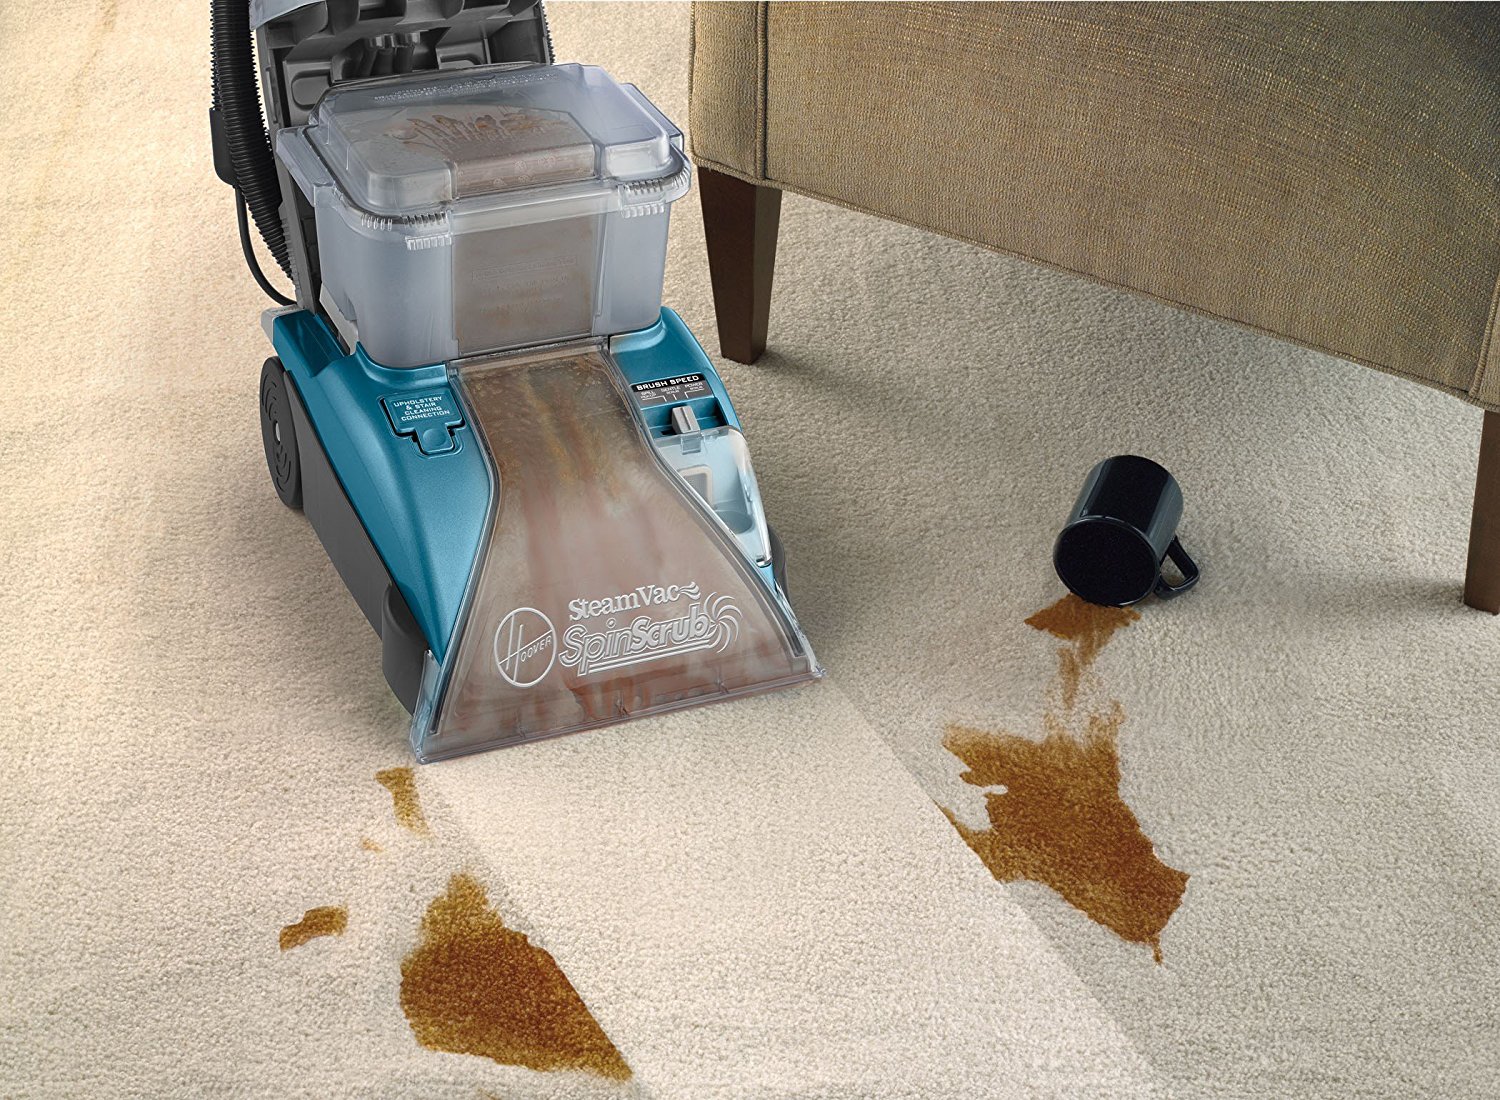 Today only: Hoover SteamVac carpet cleaner for $70